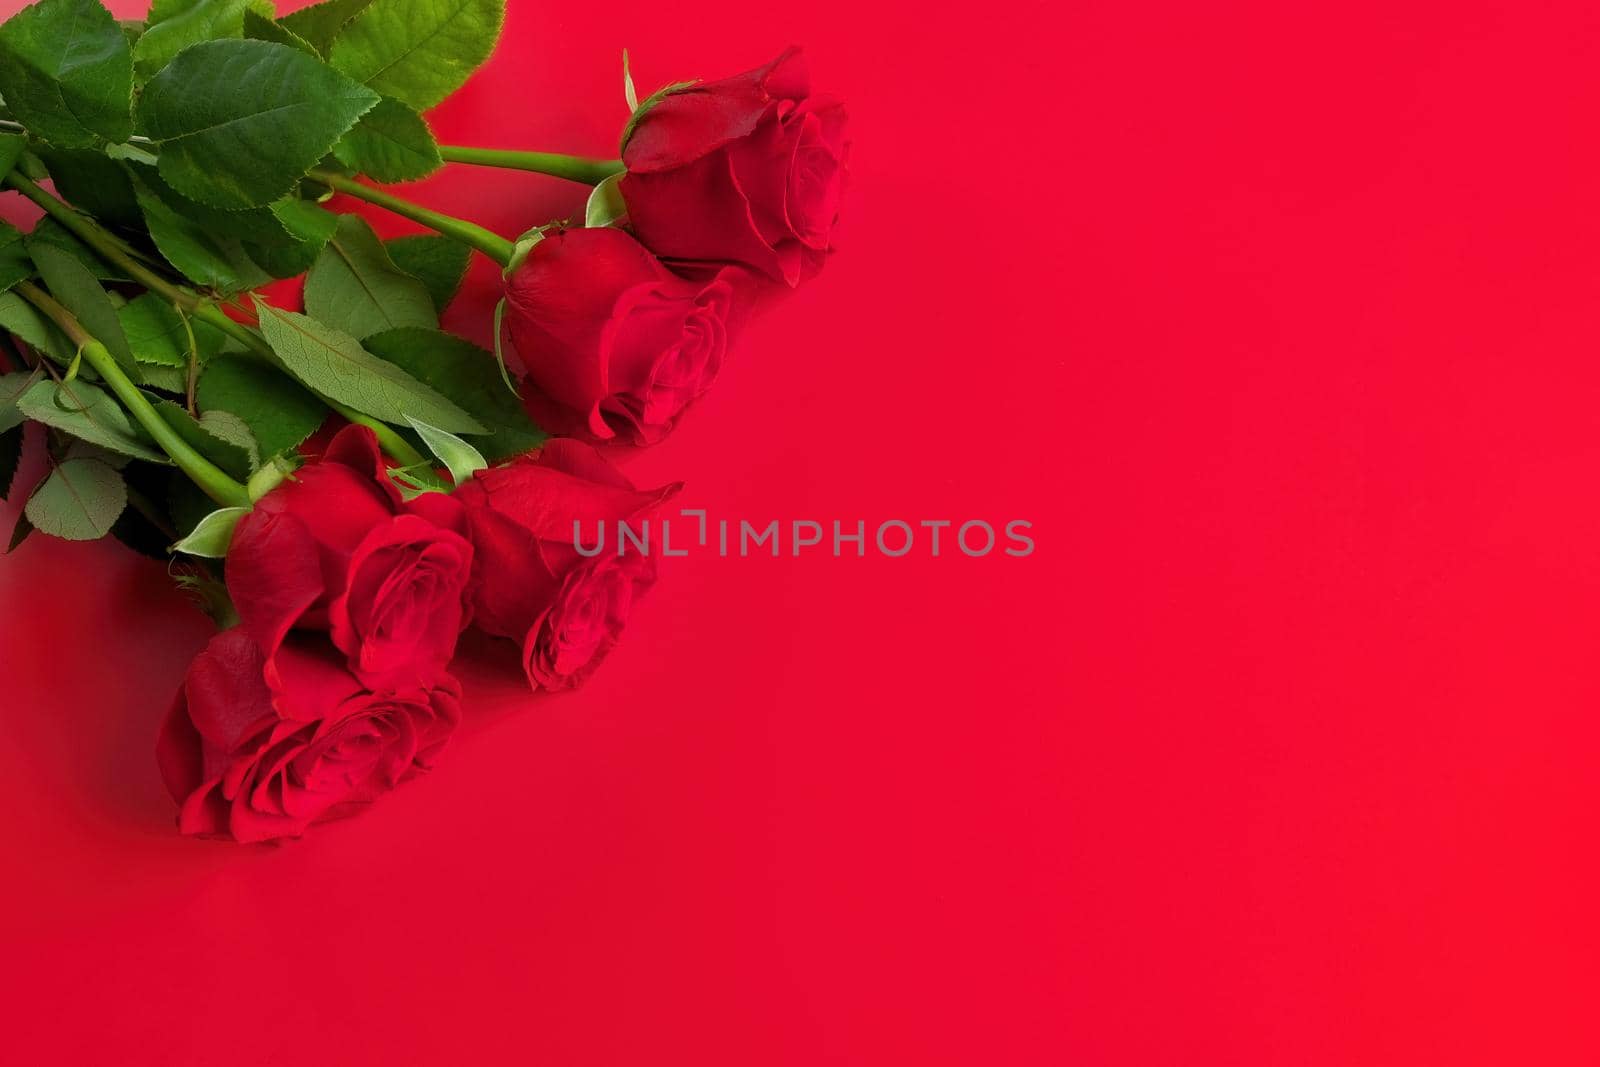 Directly Above Overhead View of Red Rose Bouquet on a Red Background. Copy space right. by markvandam